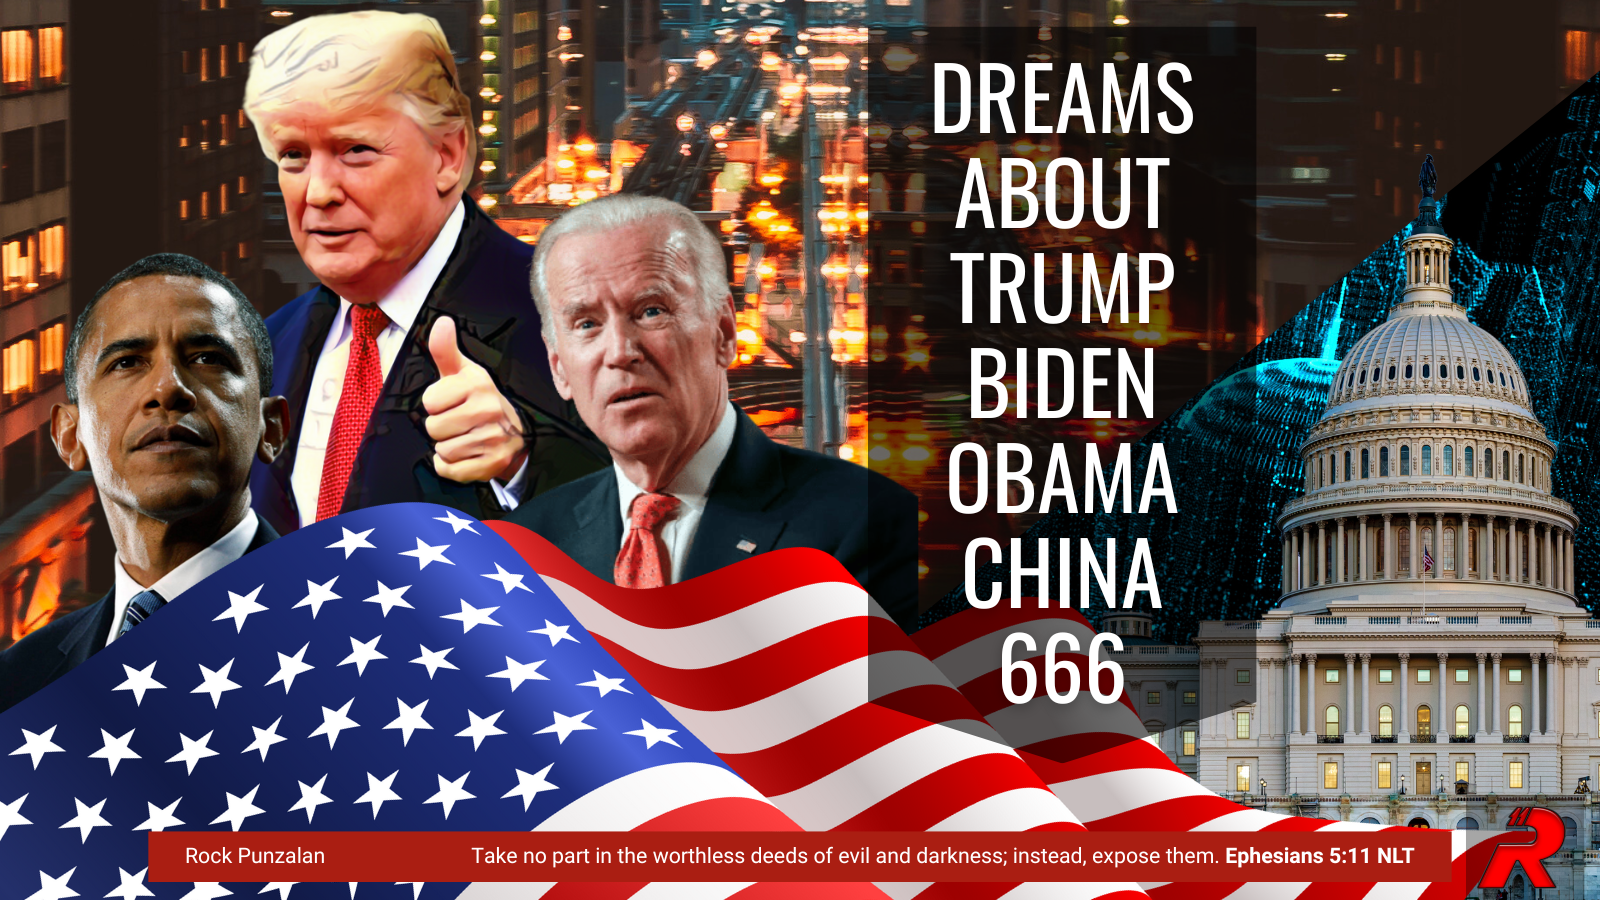 Dreams about Trump, Biden, Obama, 666, China, and multitudes of dead people